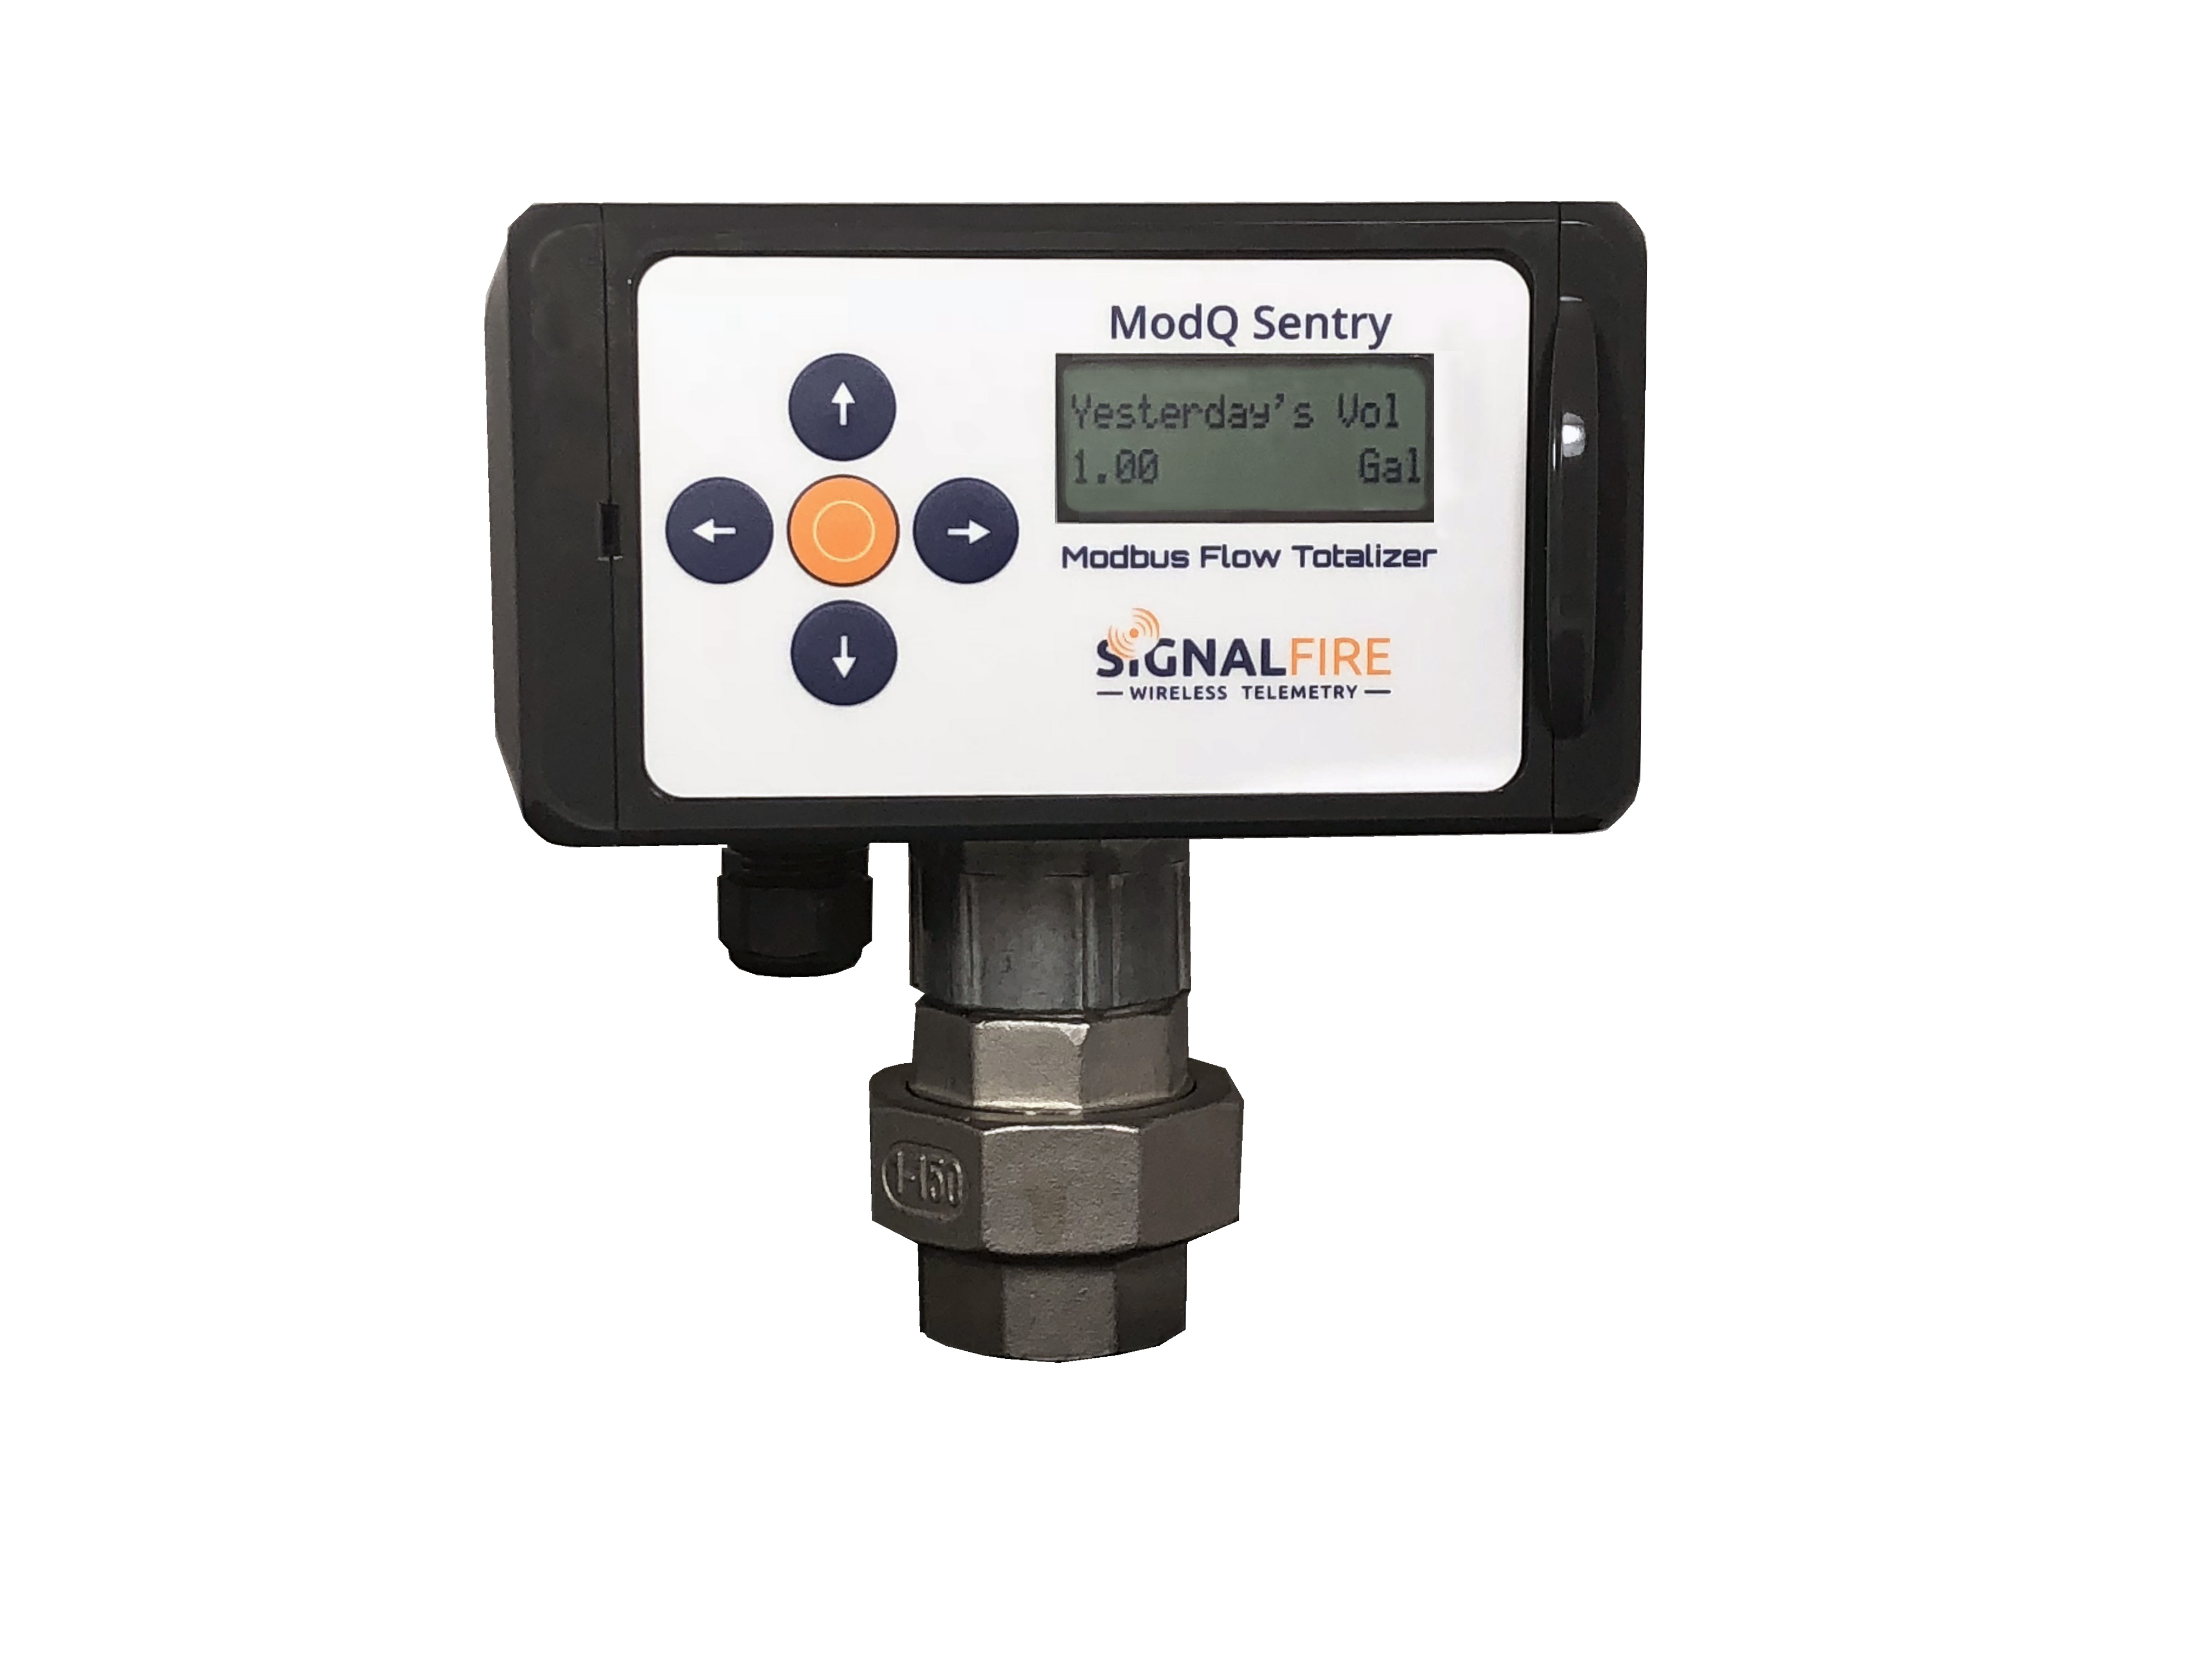 SignalFire Wireless Telemetry launches the ModQ Sentry a Modbus Flow Totalizer 